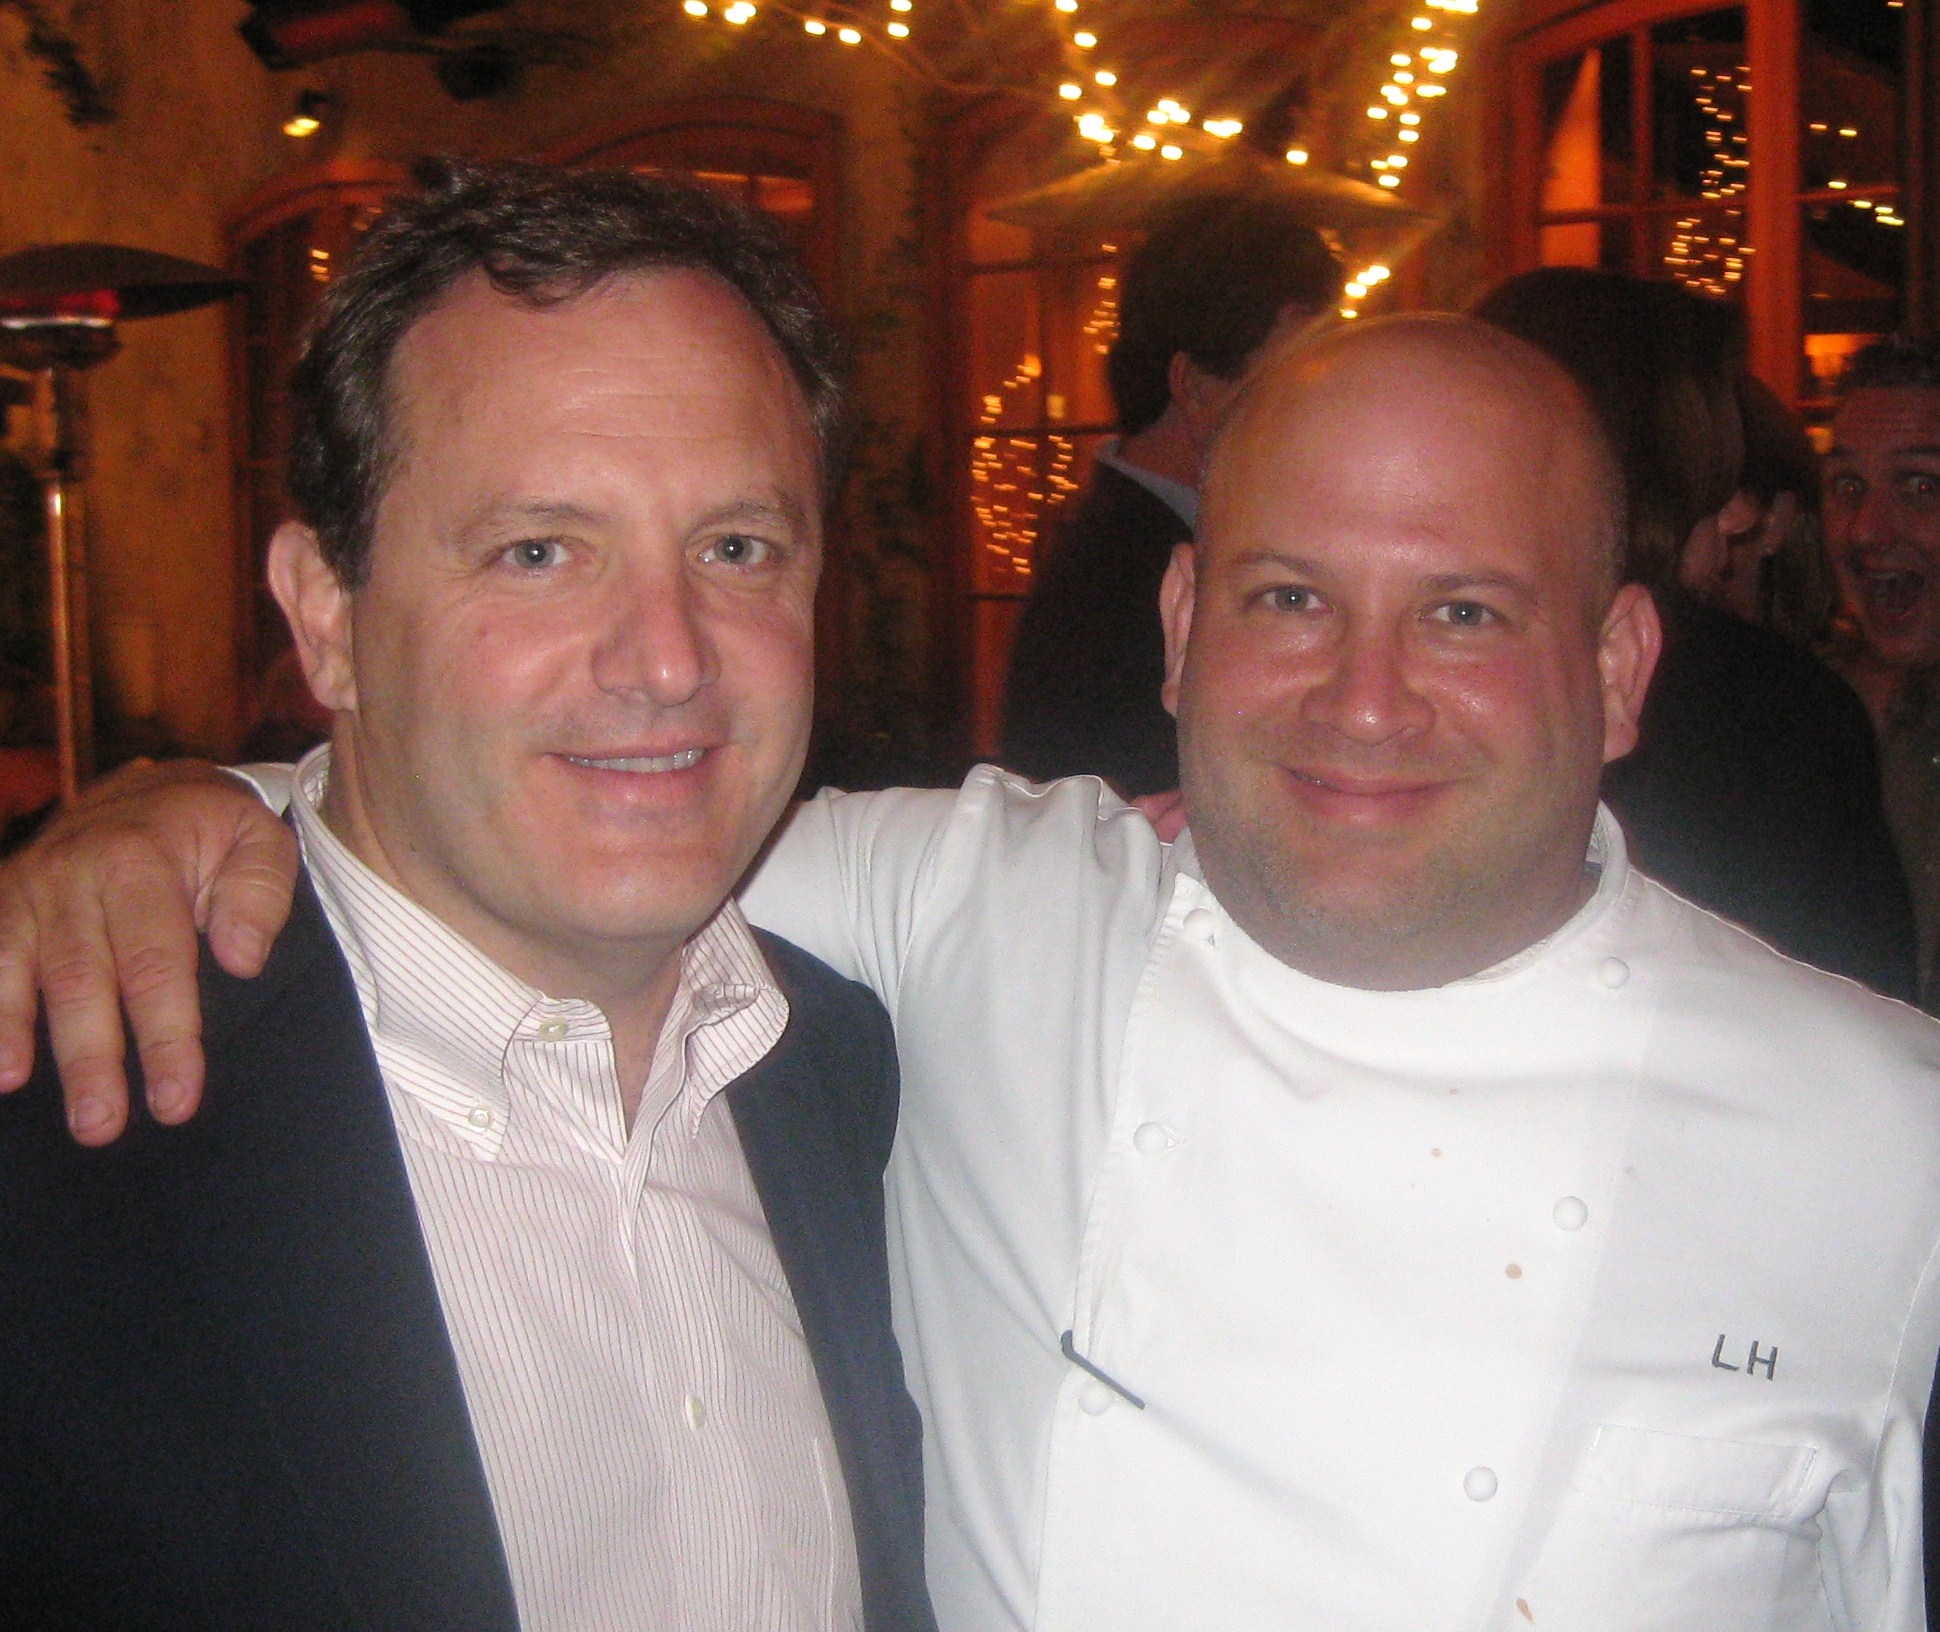 Executive chef Lee Hefter with Paul Pucino